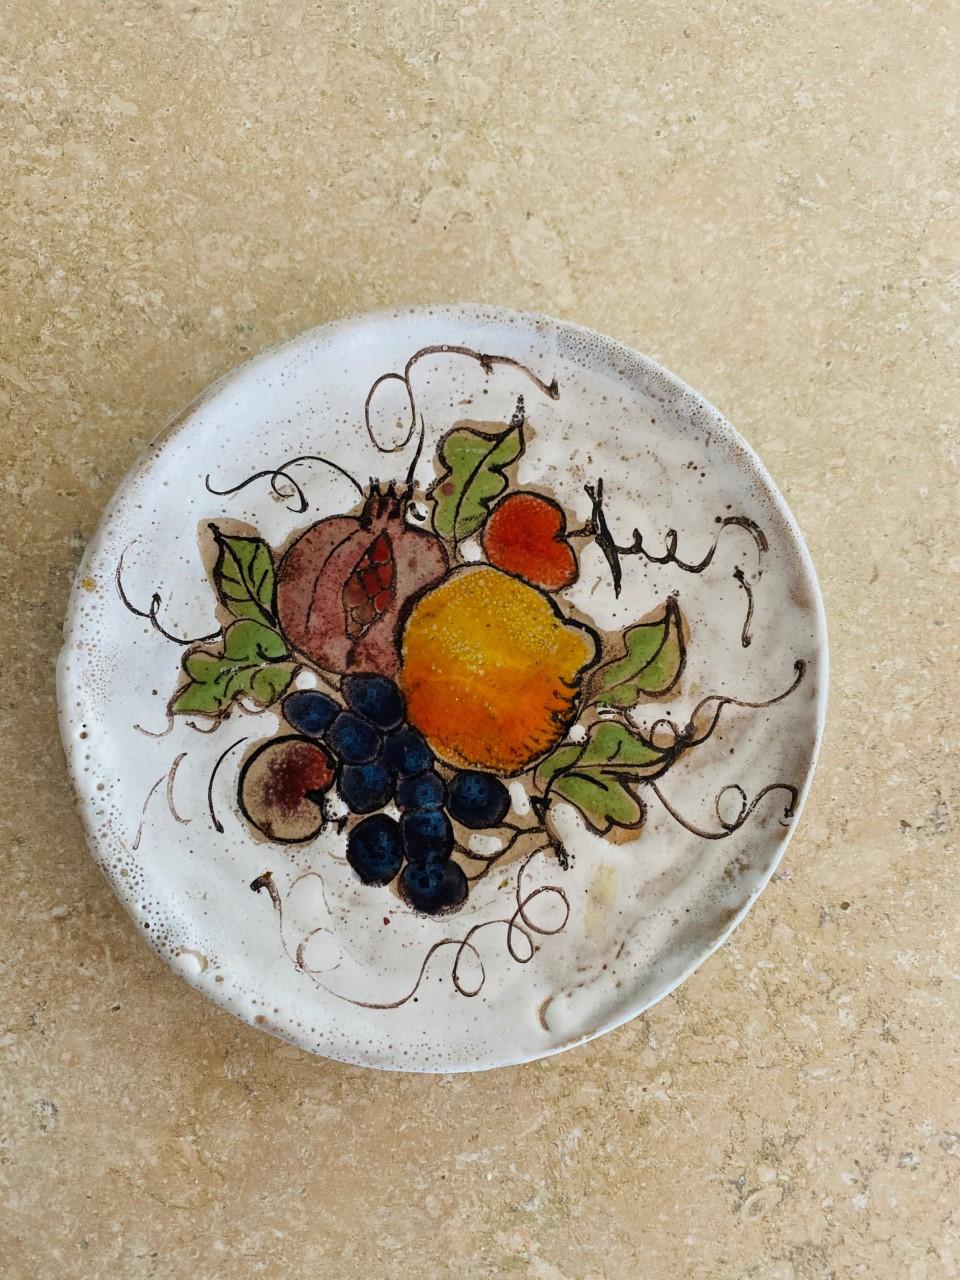 Beautiful hand painted ceramic plate with a fruit still life by Elio Schiavon. This mid century piece is full of detail: Schiavon depicts a still life in a variety of lively colors with a white glaze as a background. Signed and dated. The colors and